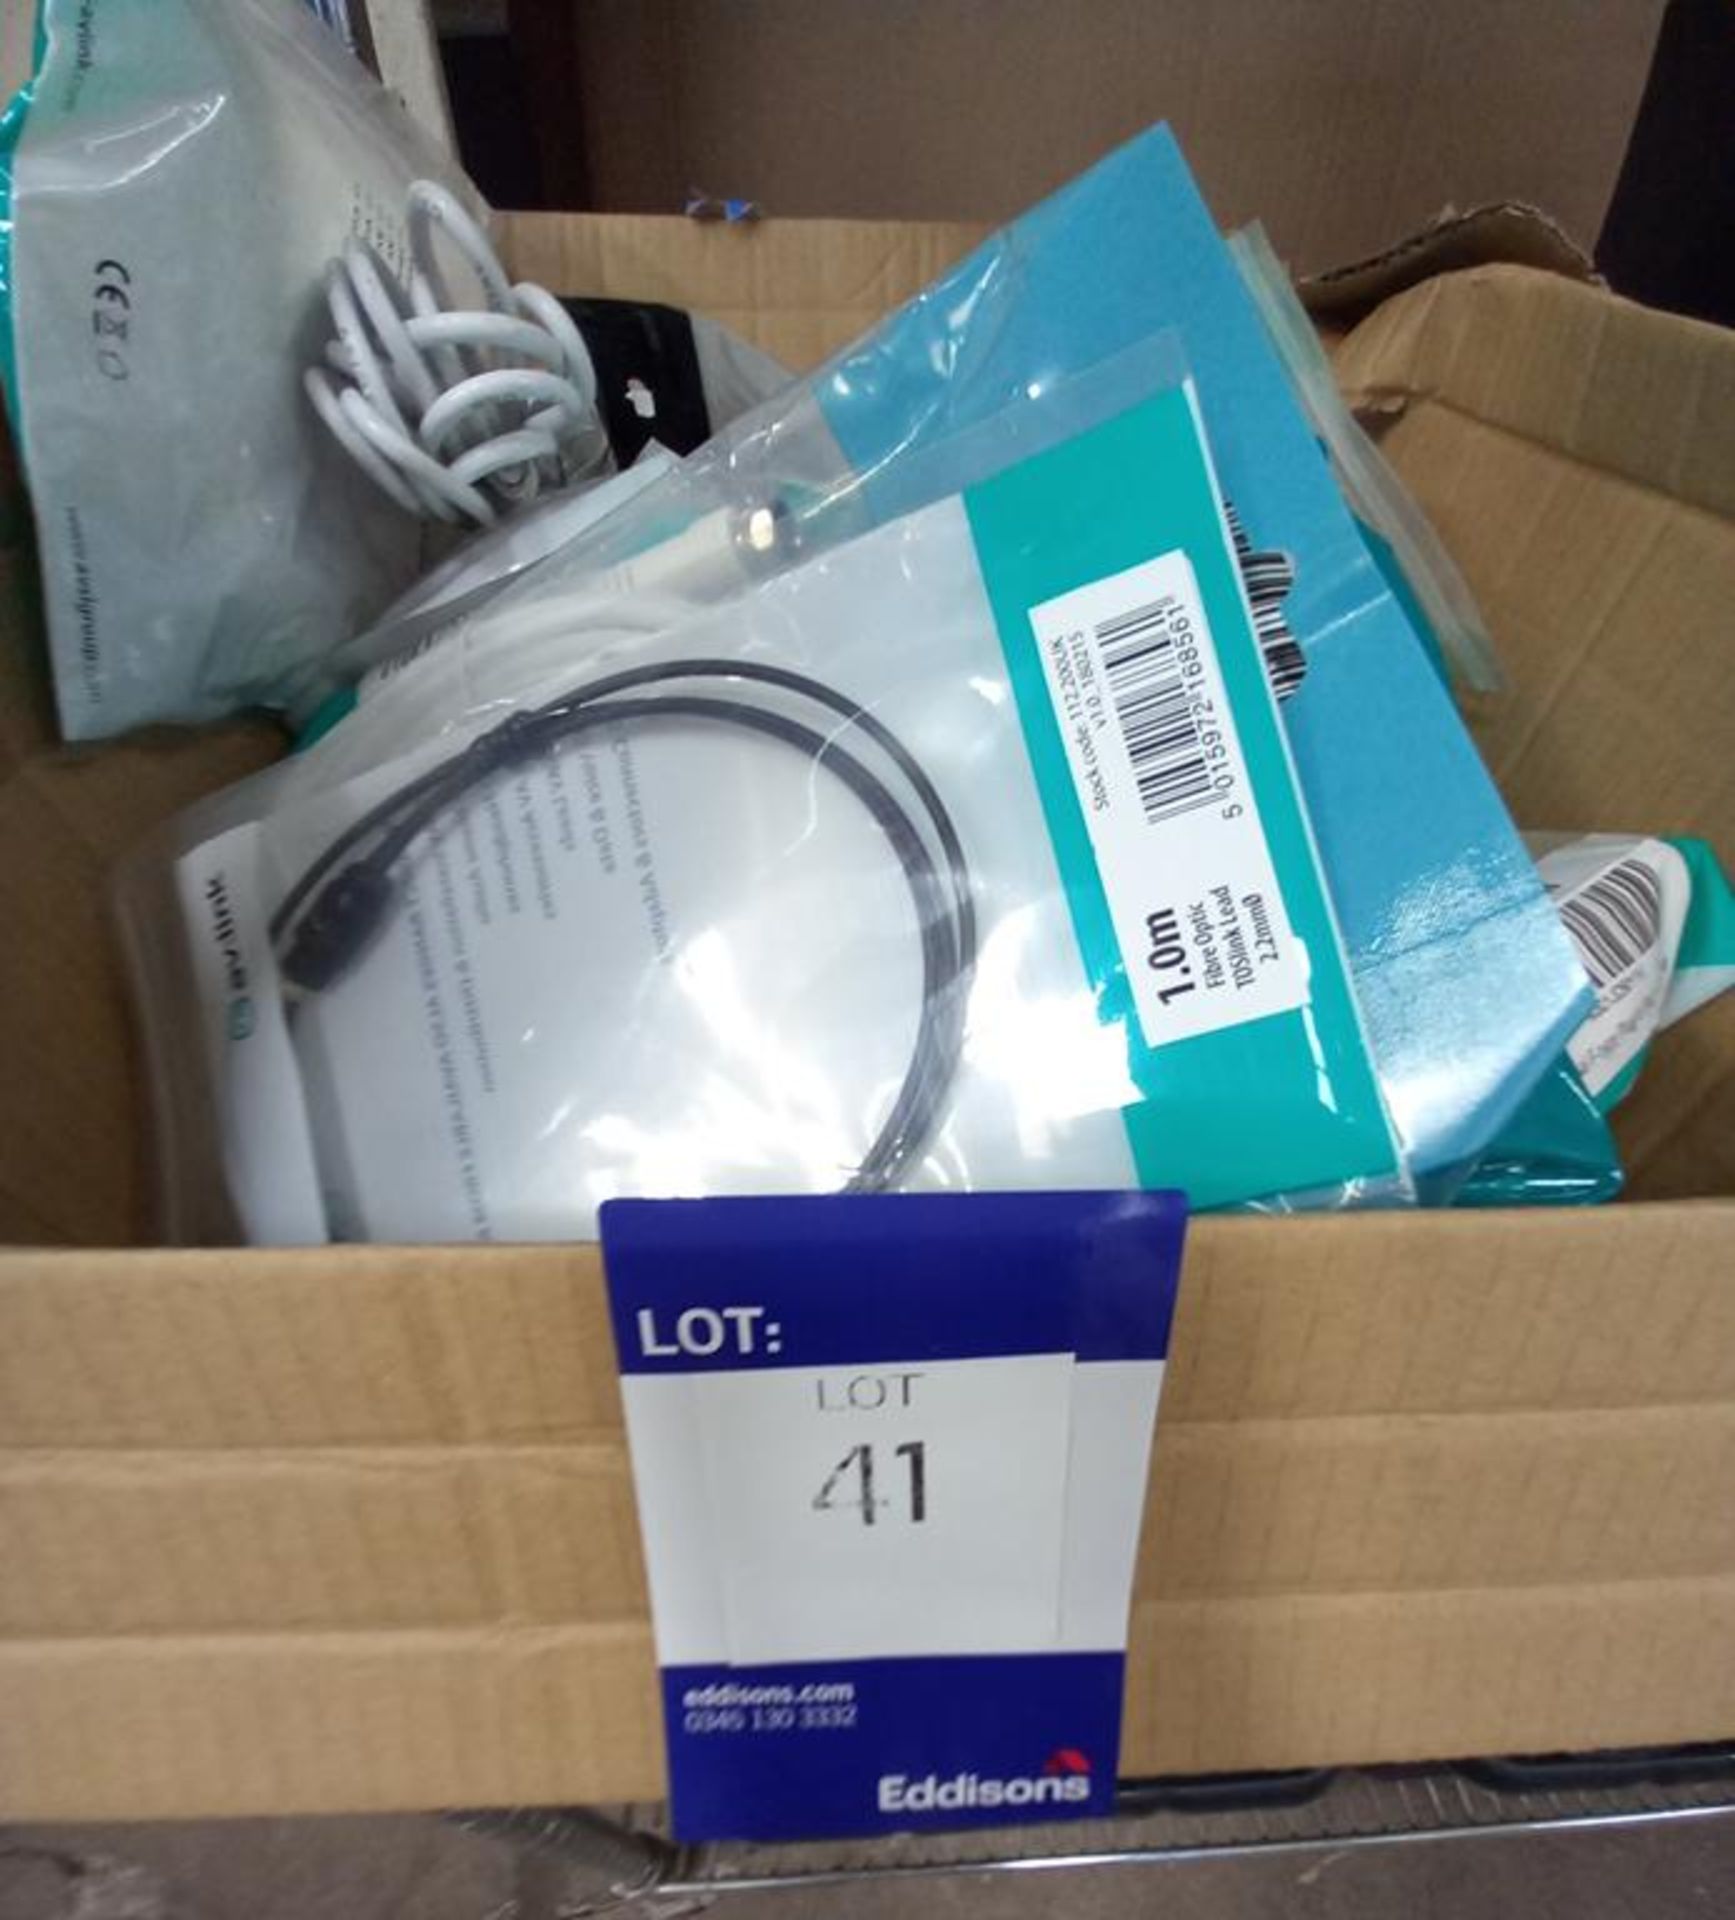 2x Quantity of various AV cables to box and Quantity of various AV Connectors to 2 boxes - Image 12 of 18